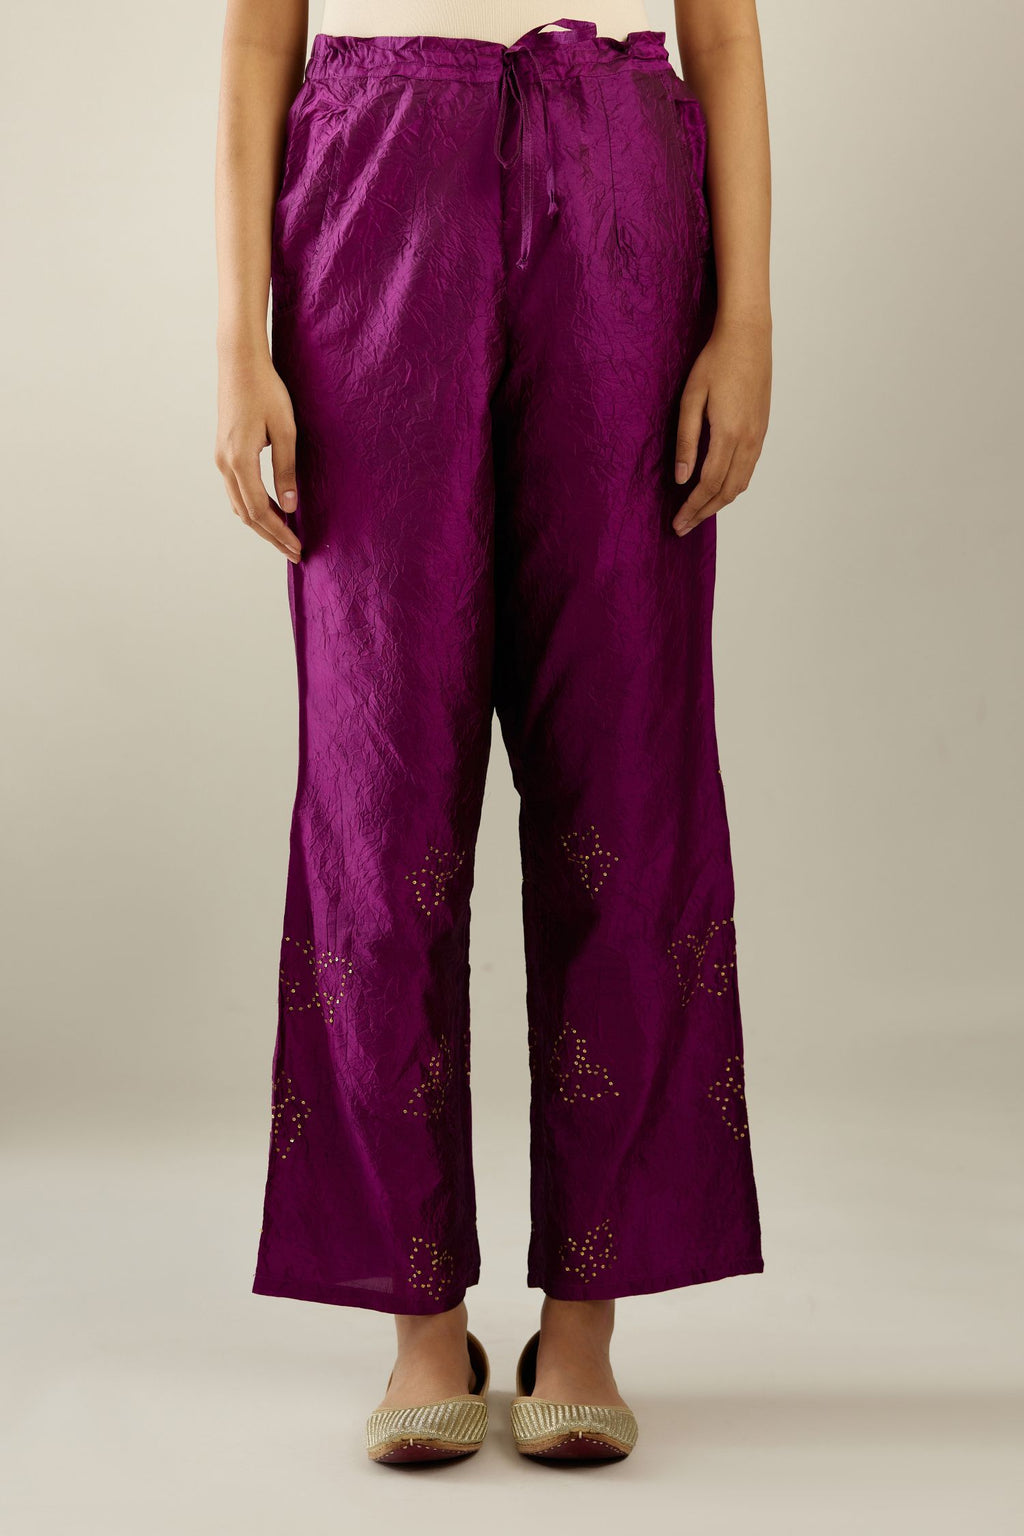 Sangria hand crushed silk pants with side pockets and assorted sequined butterflies till mid-calf length.